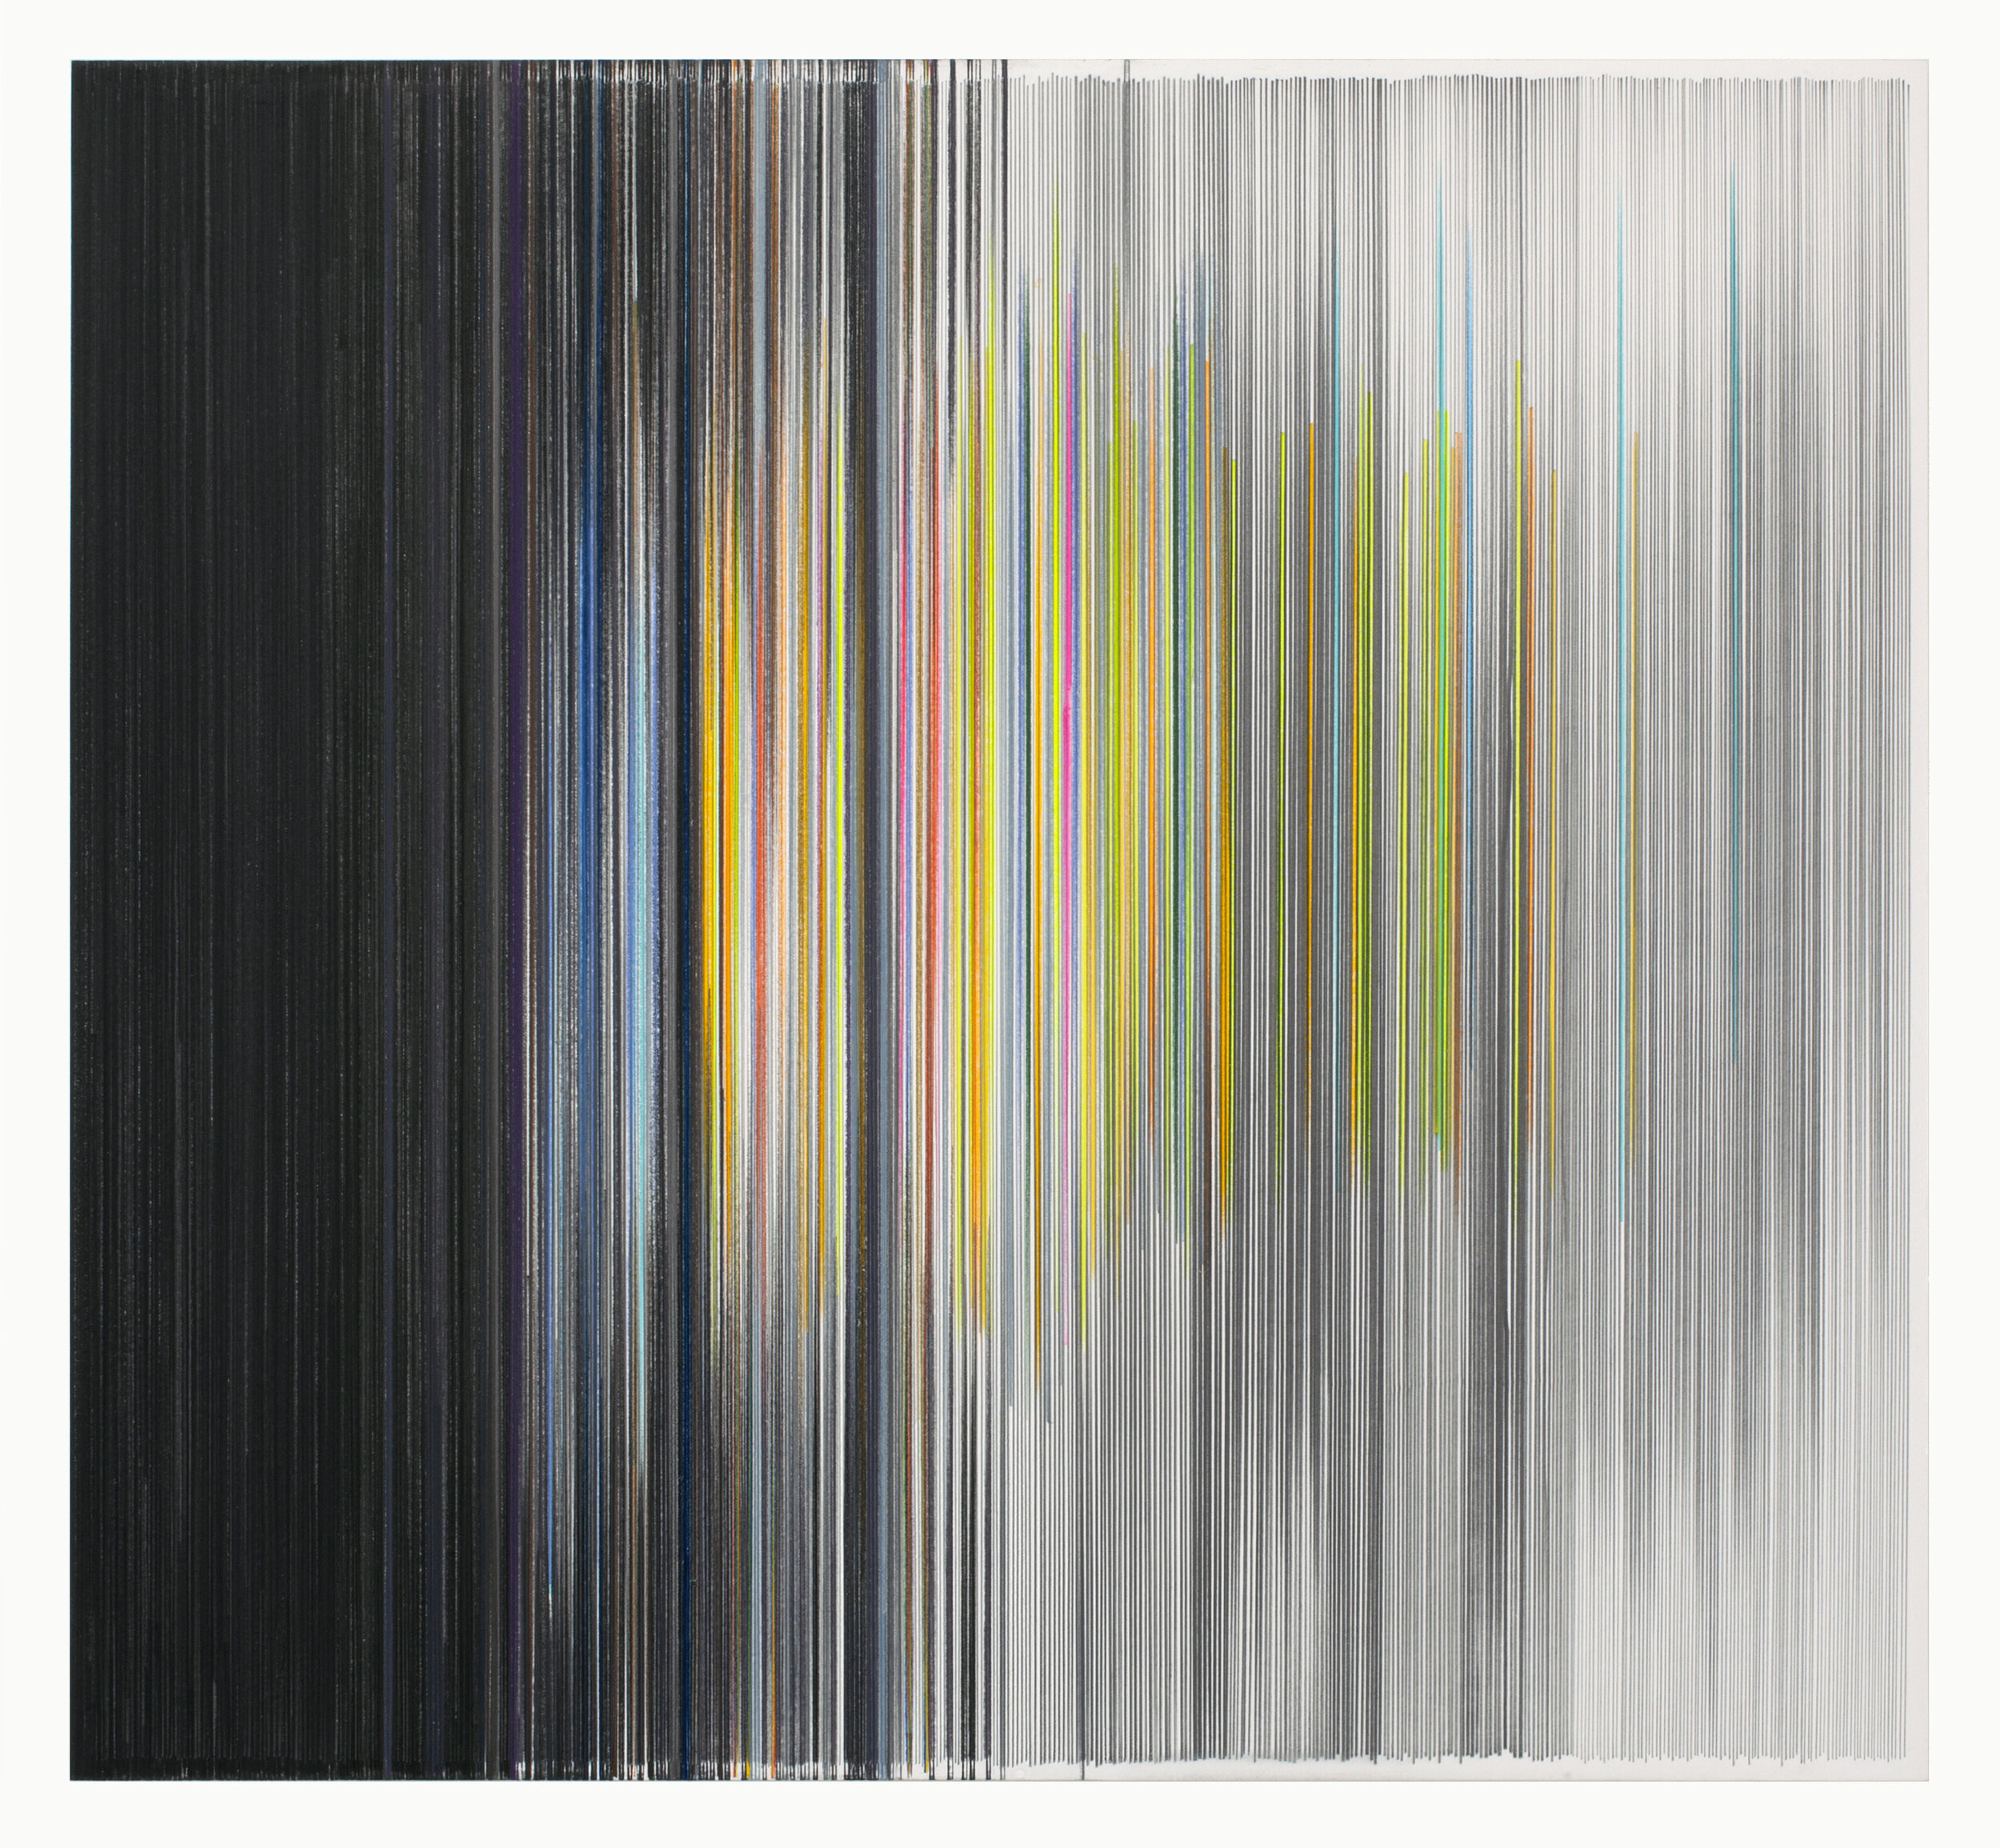    flash: moon   2021 graphite and colored pencil on mat board 24 by 26 inches included in   Everyday   at Haw Contemporary June 18 - August 6, 2021 